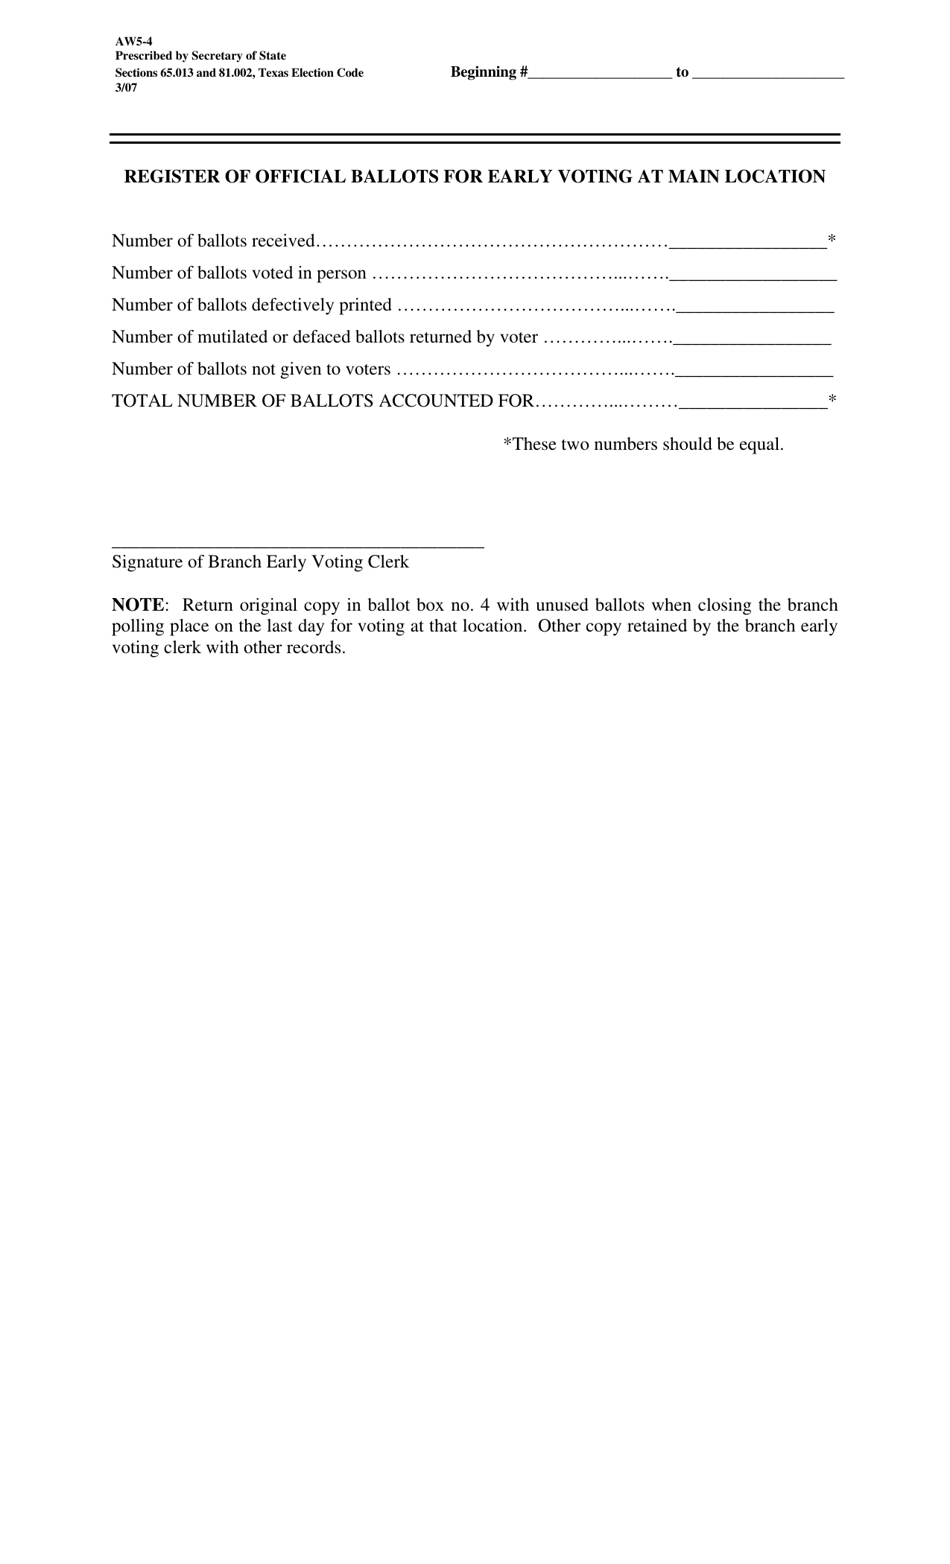 Form AW5-4 Register of Official Ballots for Early Voting at Main Location - Texas, Page 1